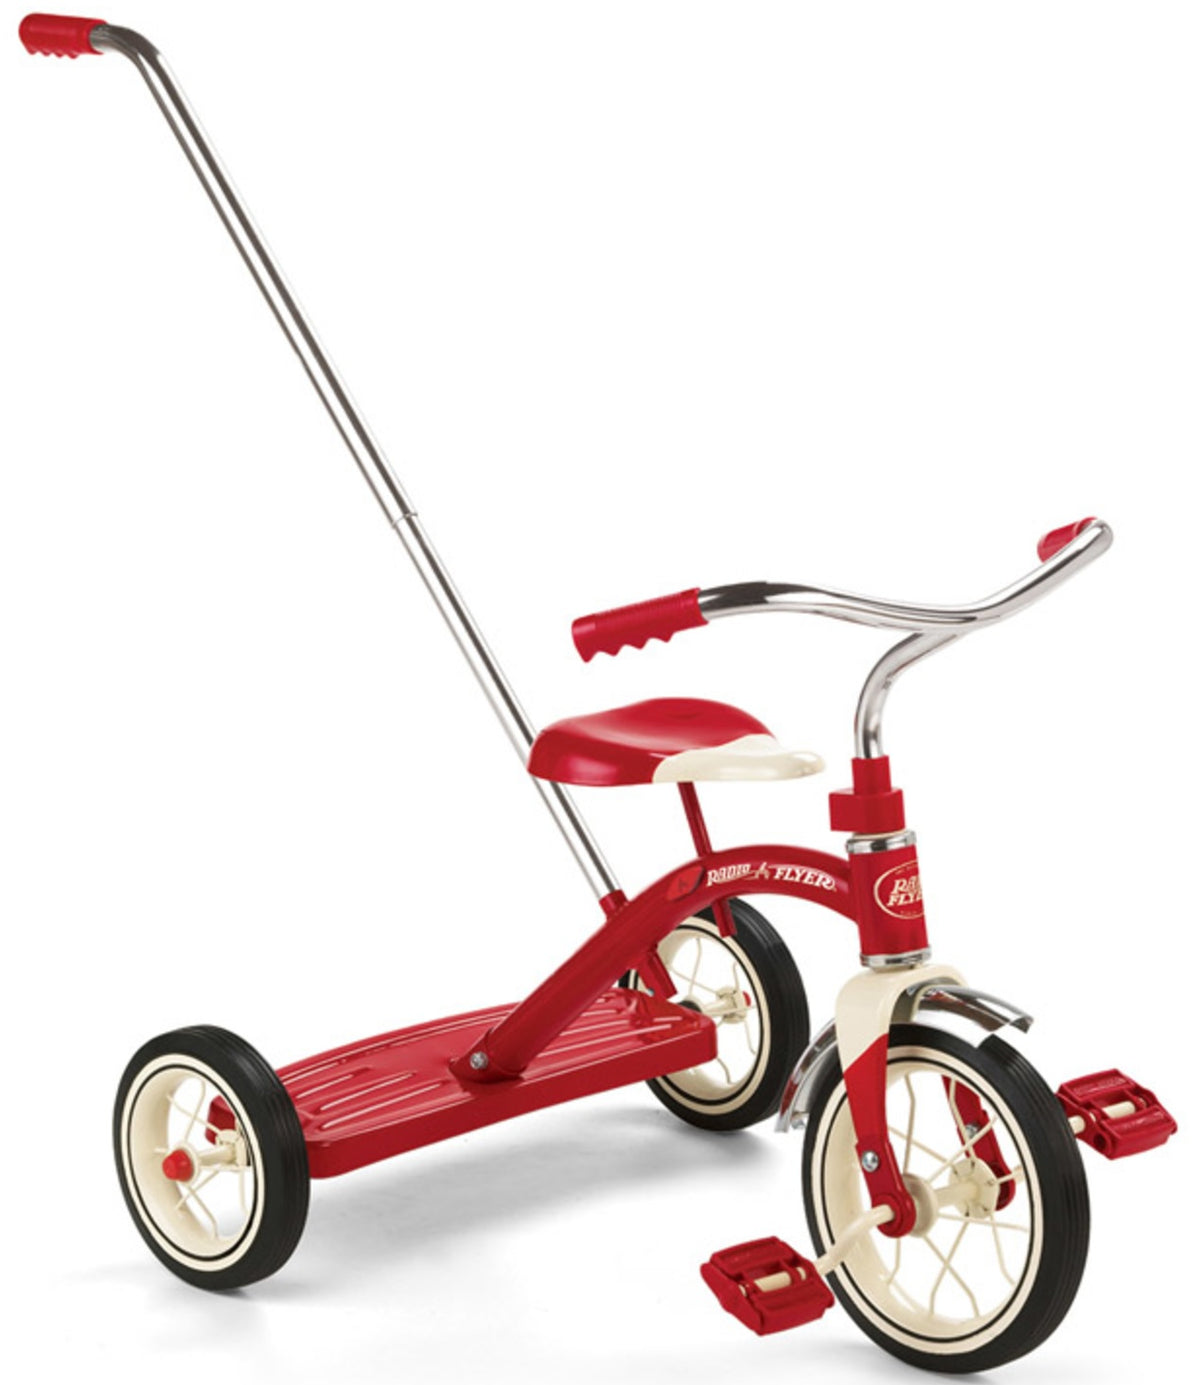 Radio Flyer 34T Classic Tricycle, Red